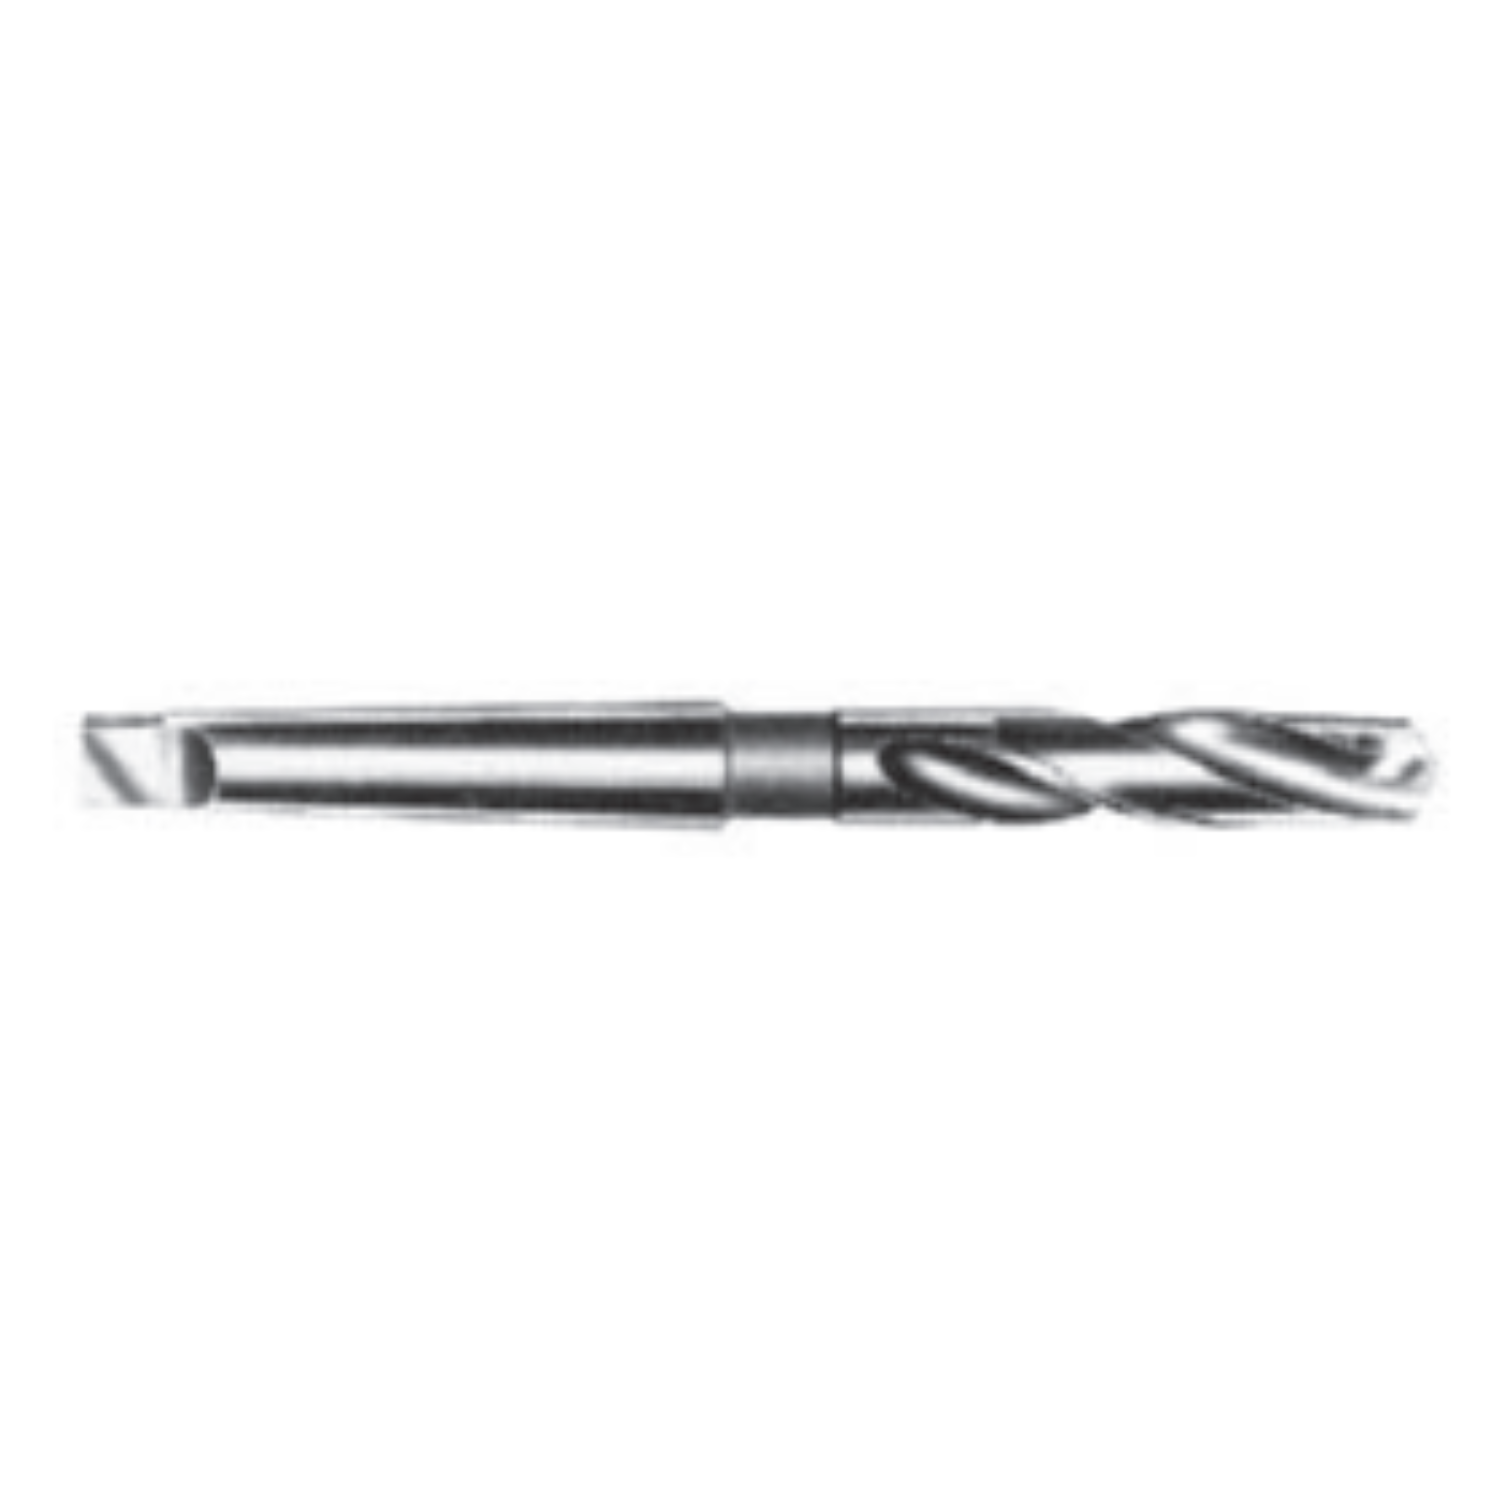 YEW AIK 6162 Morse Taper Shank Drills, Carbide Tipped Drills - Premium Carbide Tipped Drills from YEW AIK - Shop now at Yew Aik.